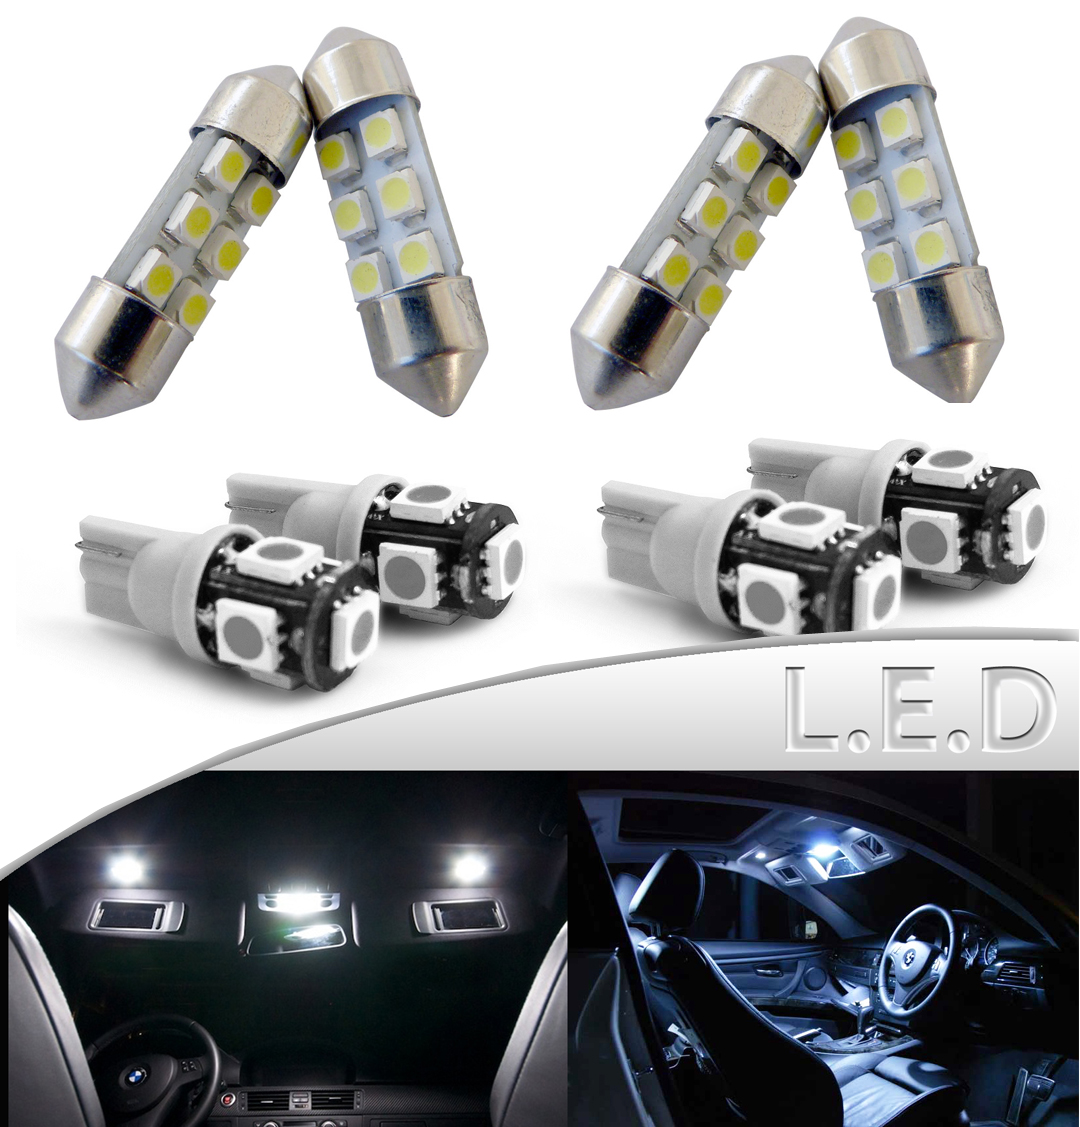 Details About Fits Toyota Corolla 2003 2017 Interior Led White License Lights Package Kit 8pcs